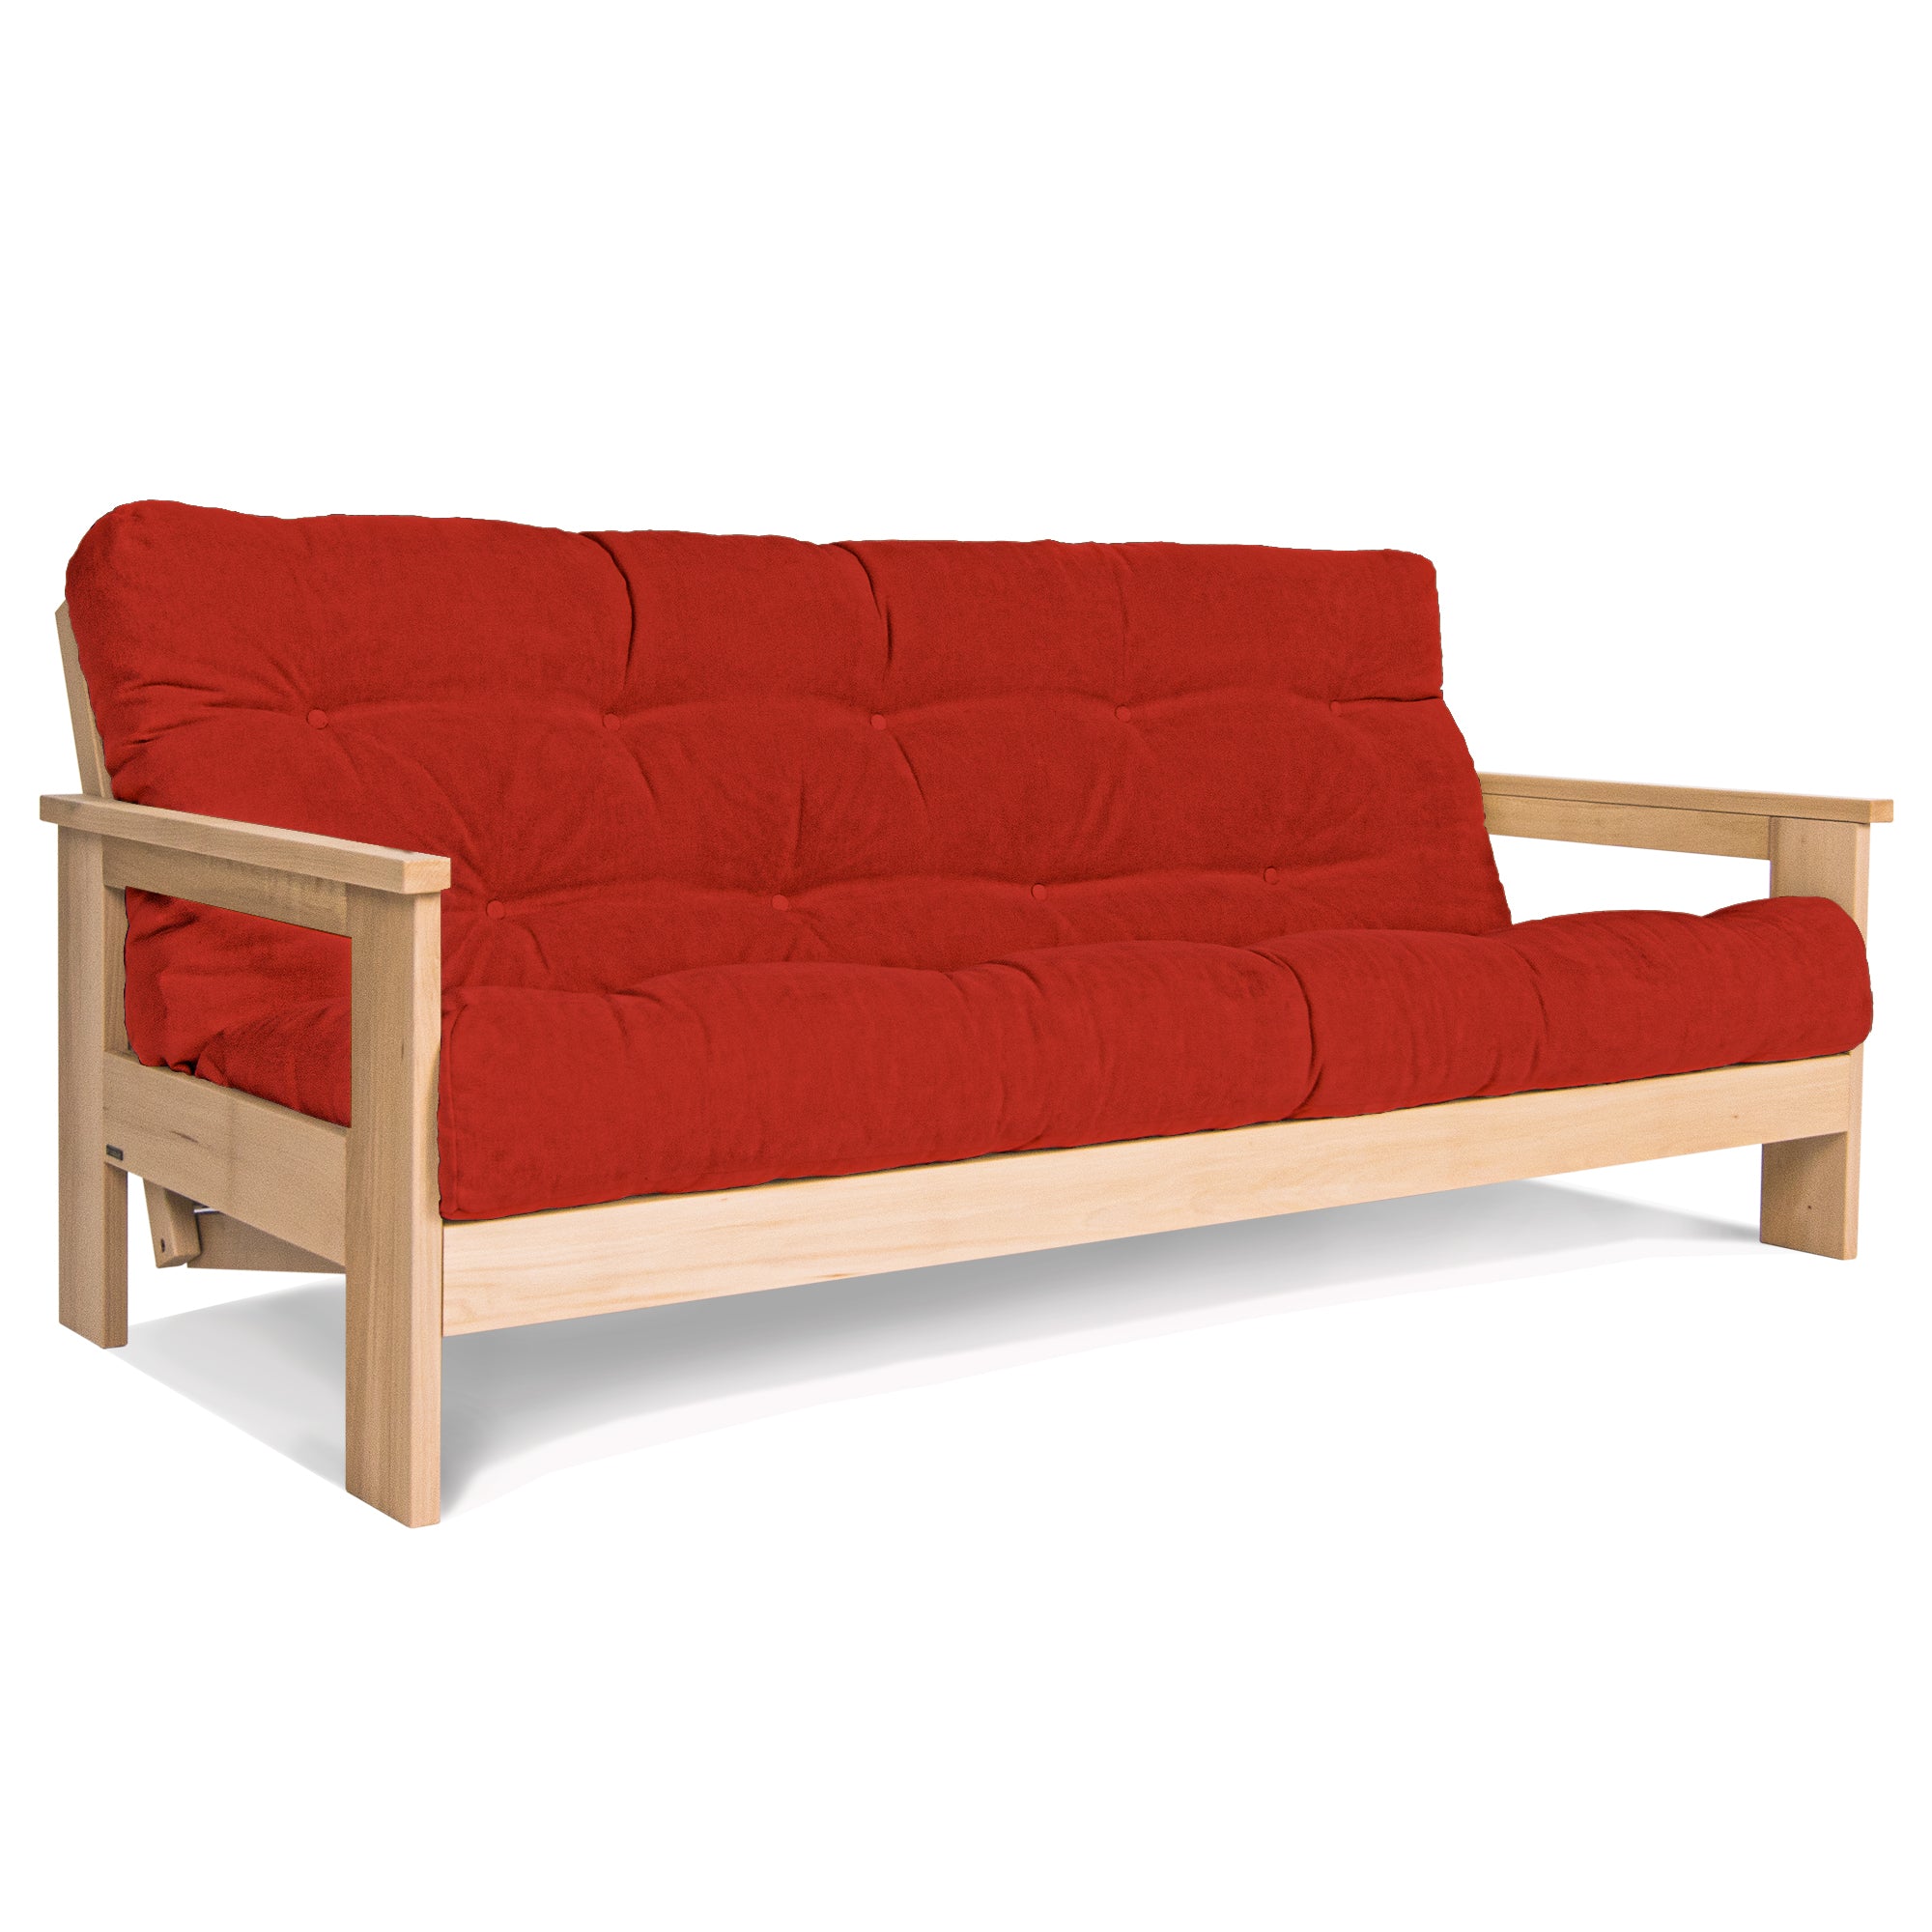 MEXICO Folding Sofa Bed-Beech Wood Frame-Natural Colour-red fabric